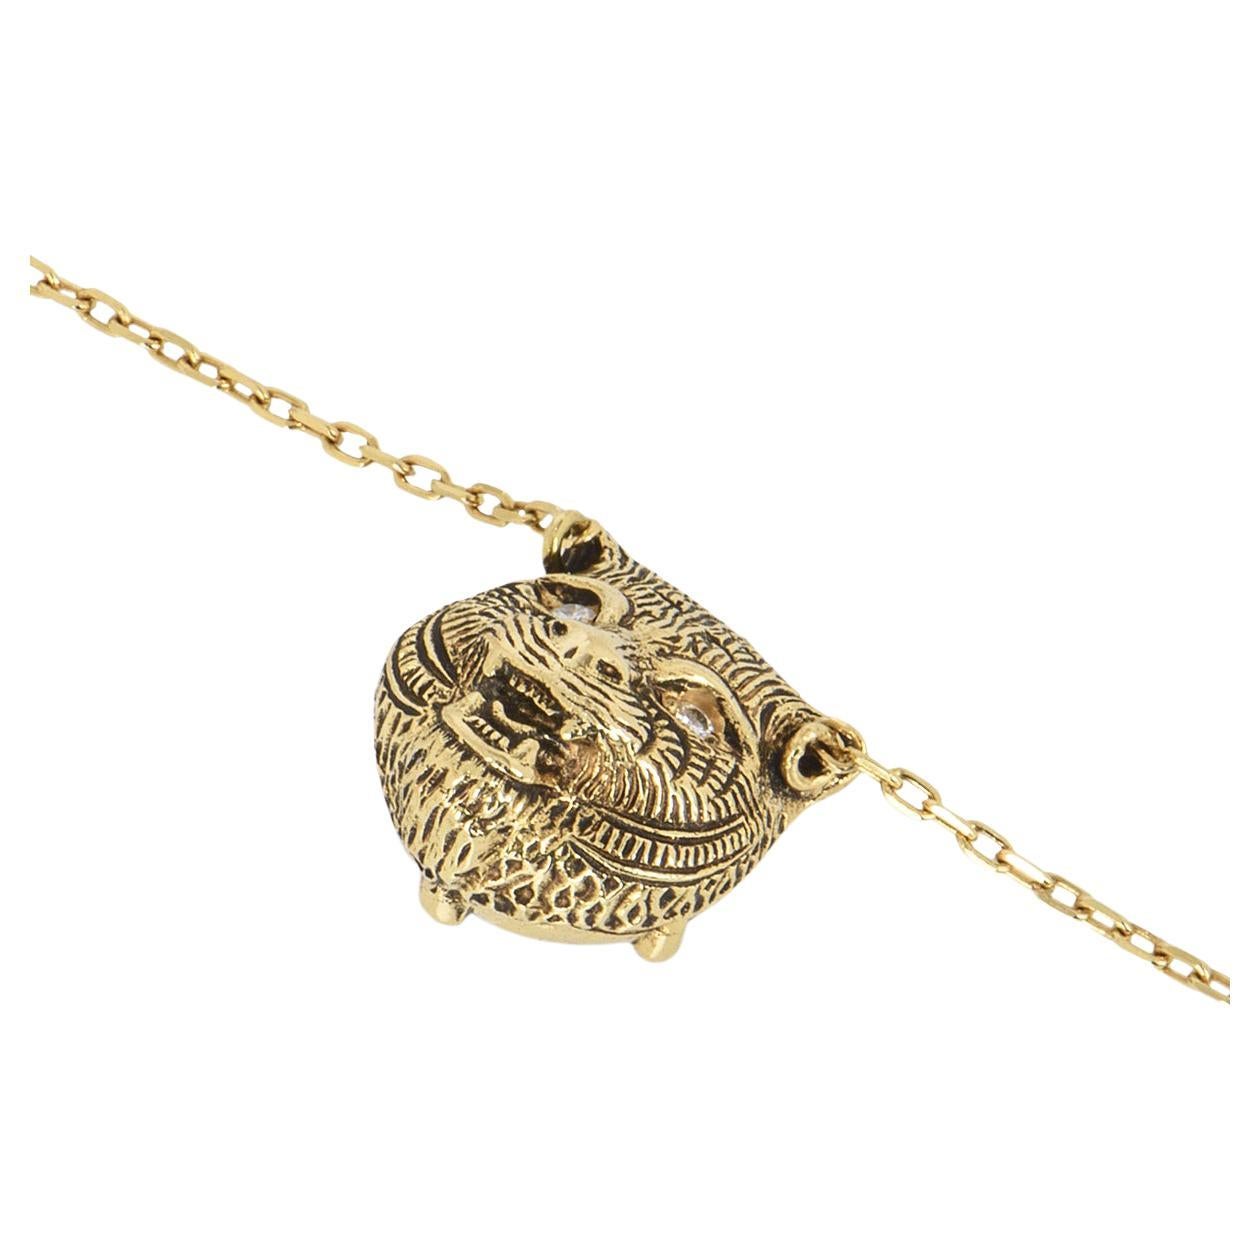 A versatile Gucci 18k yellow gold pendant from the Le Marche des Merveilles collection. The front of the pendant features a feline head with 2 round brilliant cut diamond eyes, totalling 0.02ct and on the reverse is a round carved onyx inset with a